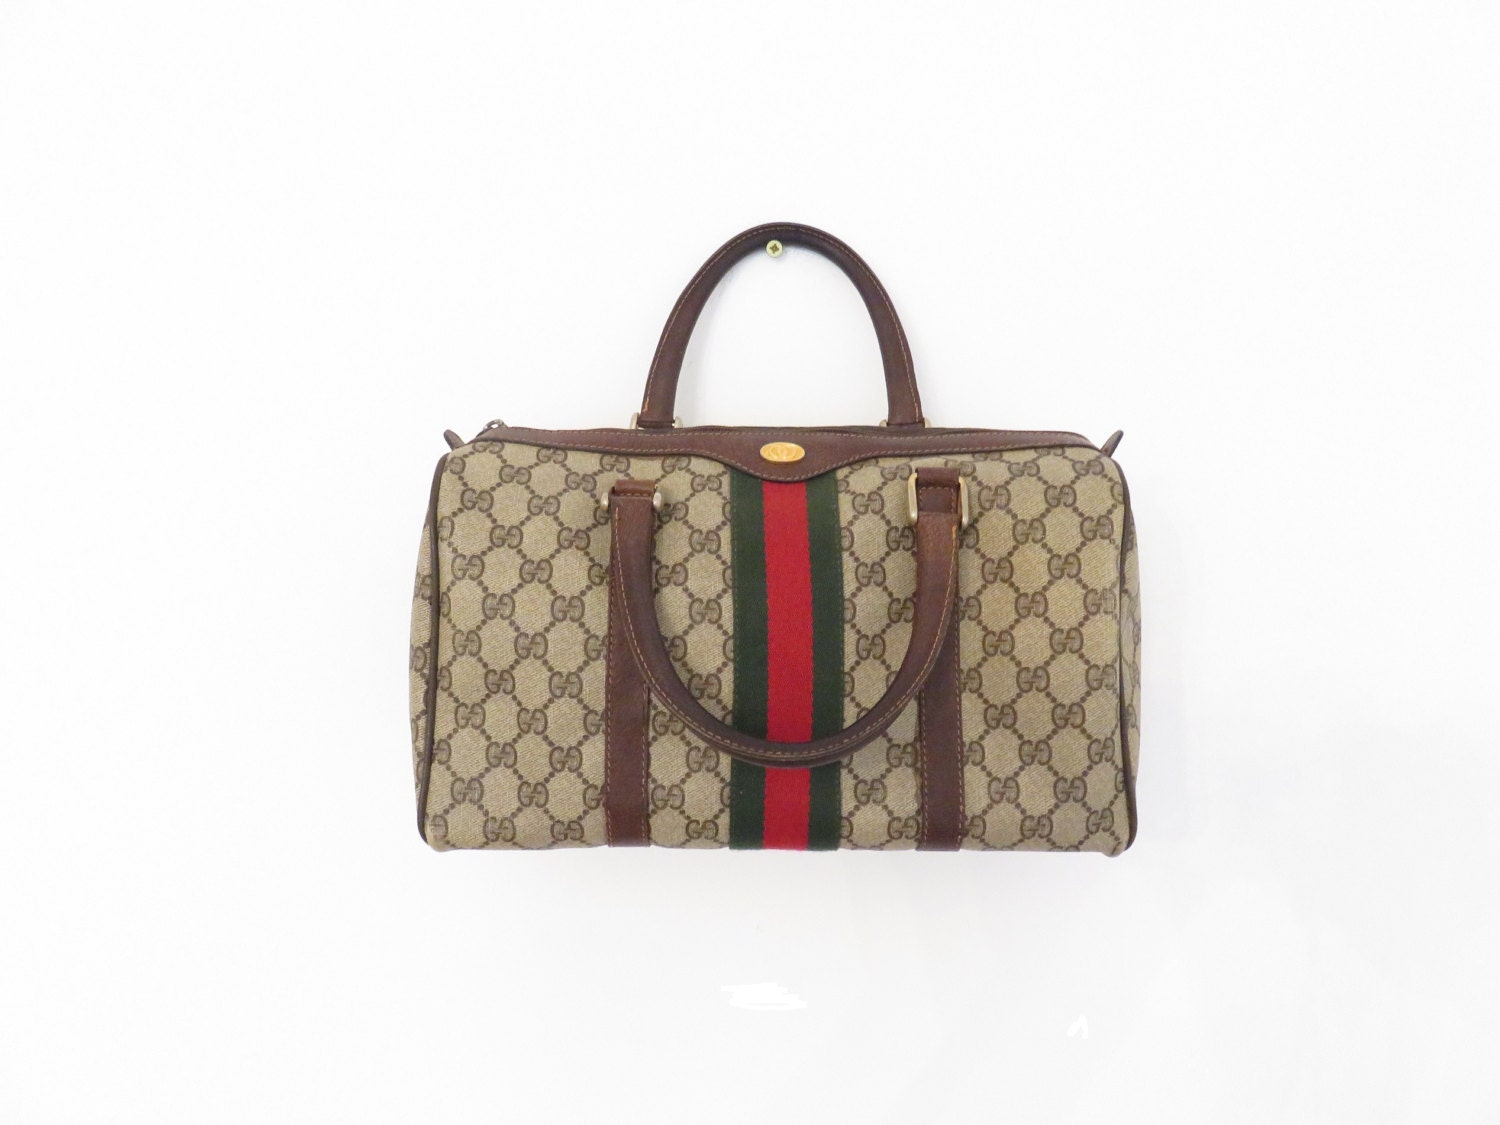 GUCCI Made in Italy Monogram Canvas Brown and Grey Speedy Bag